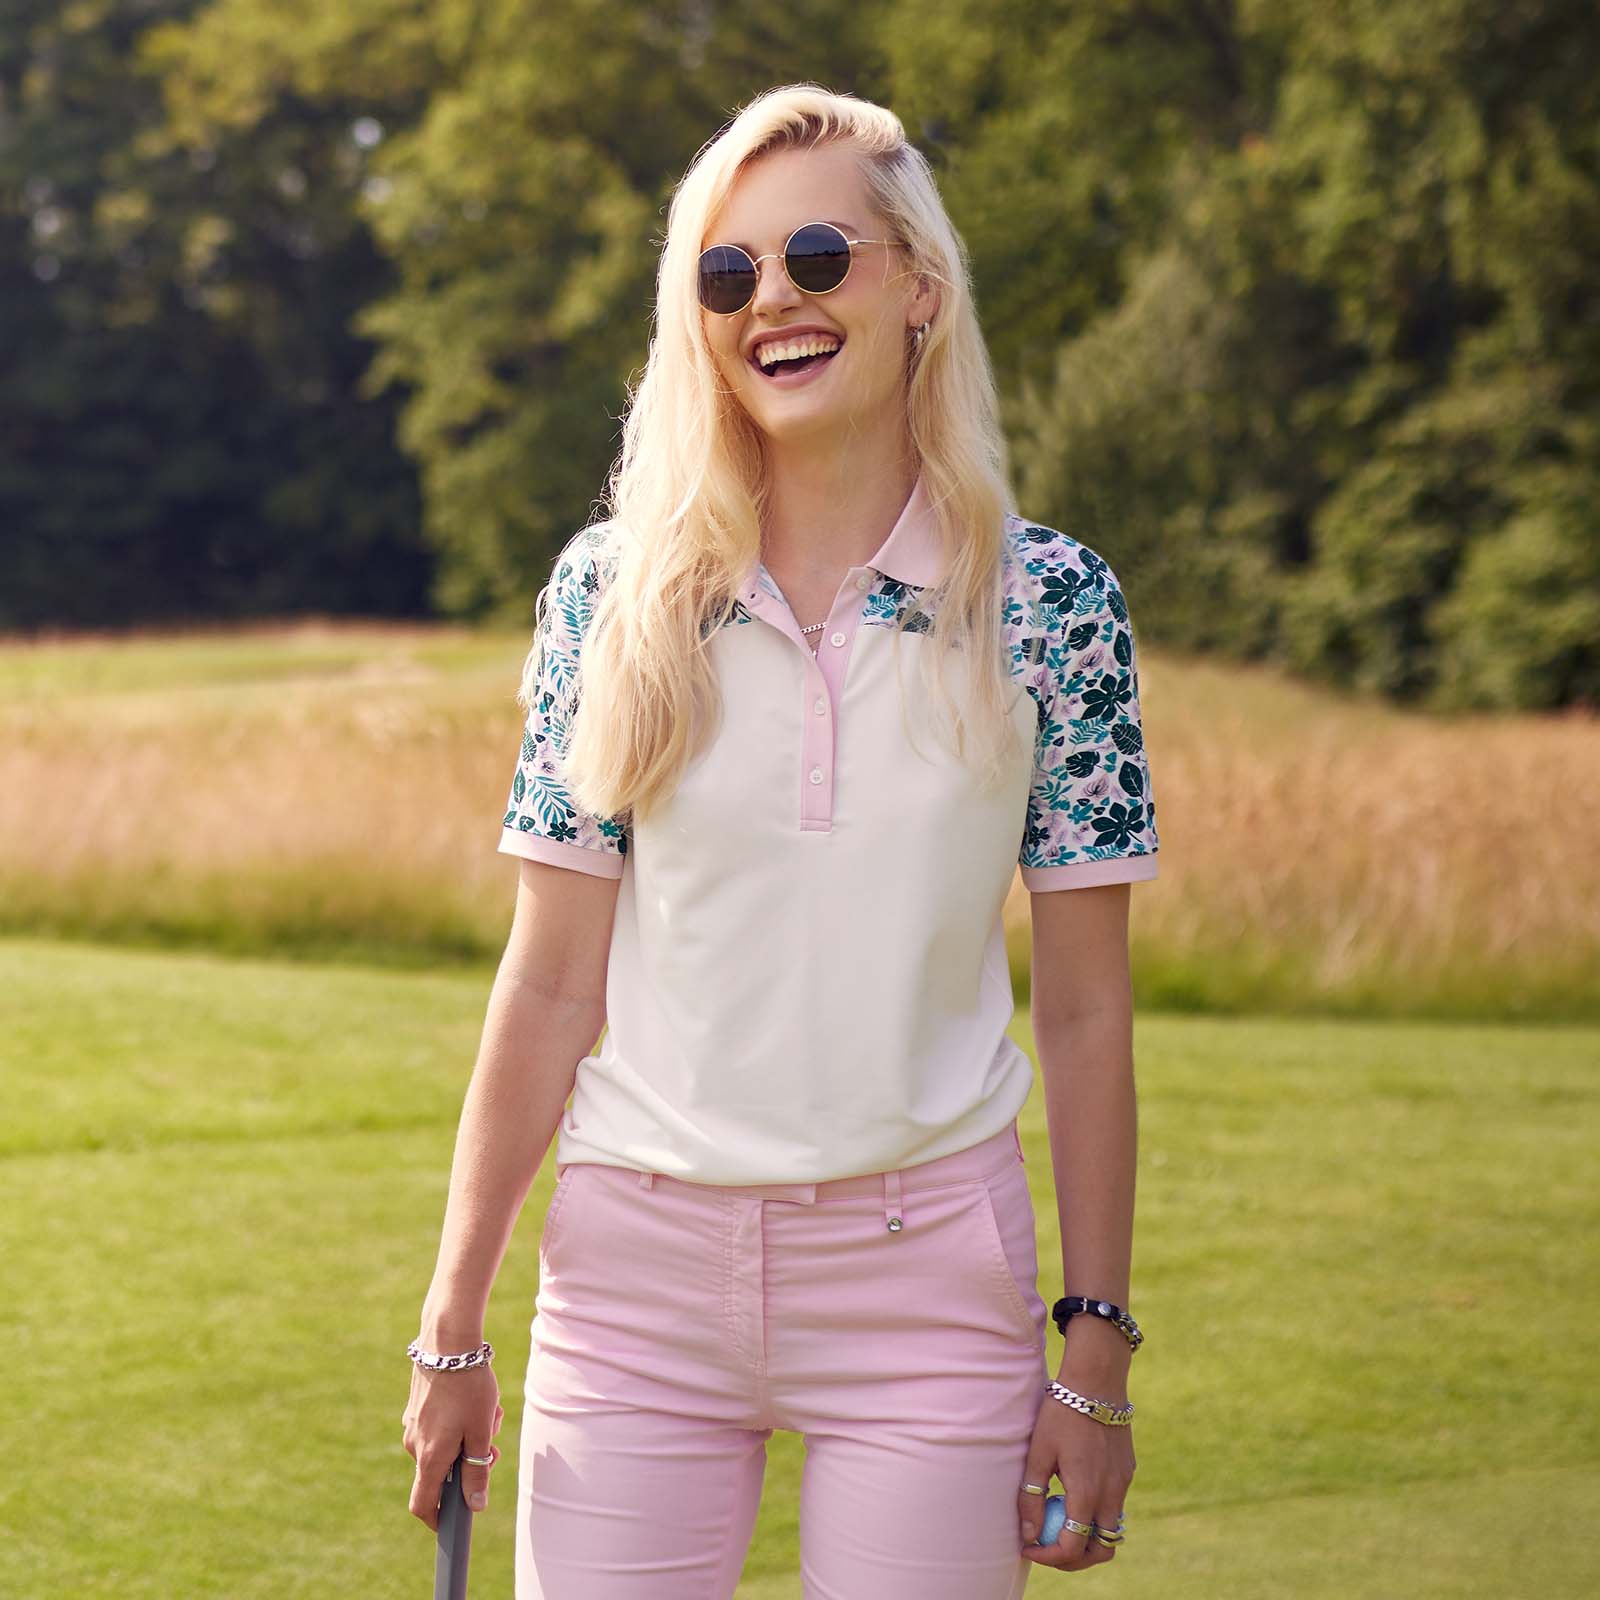 Ladies' golf polo shirt with printed elements